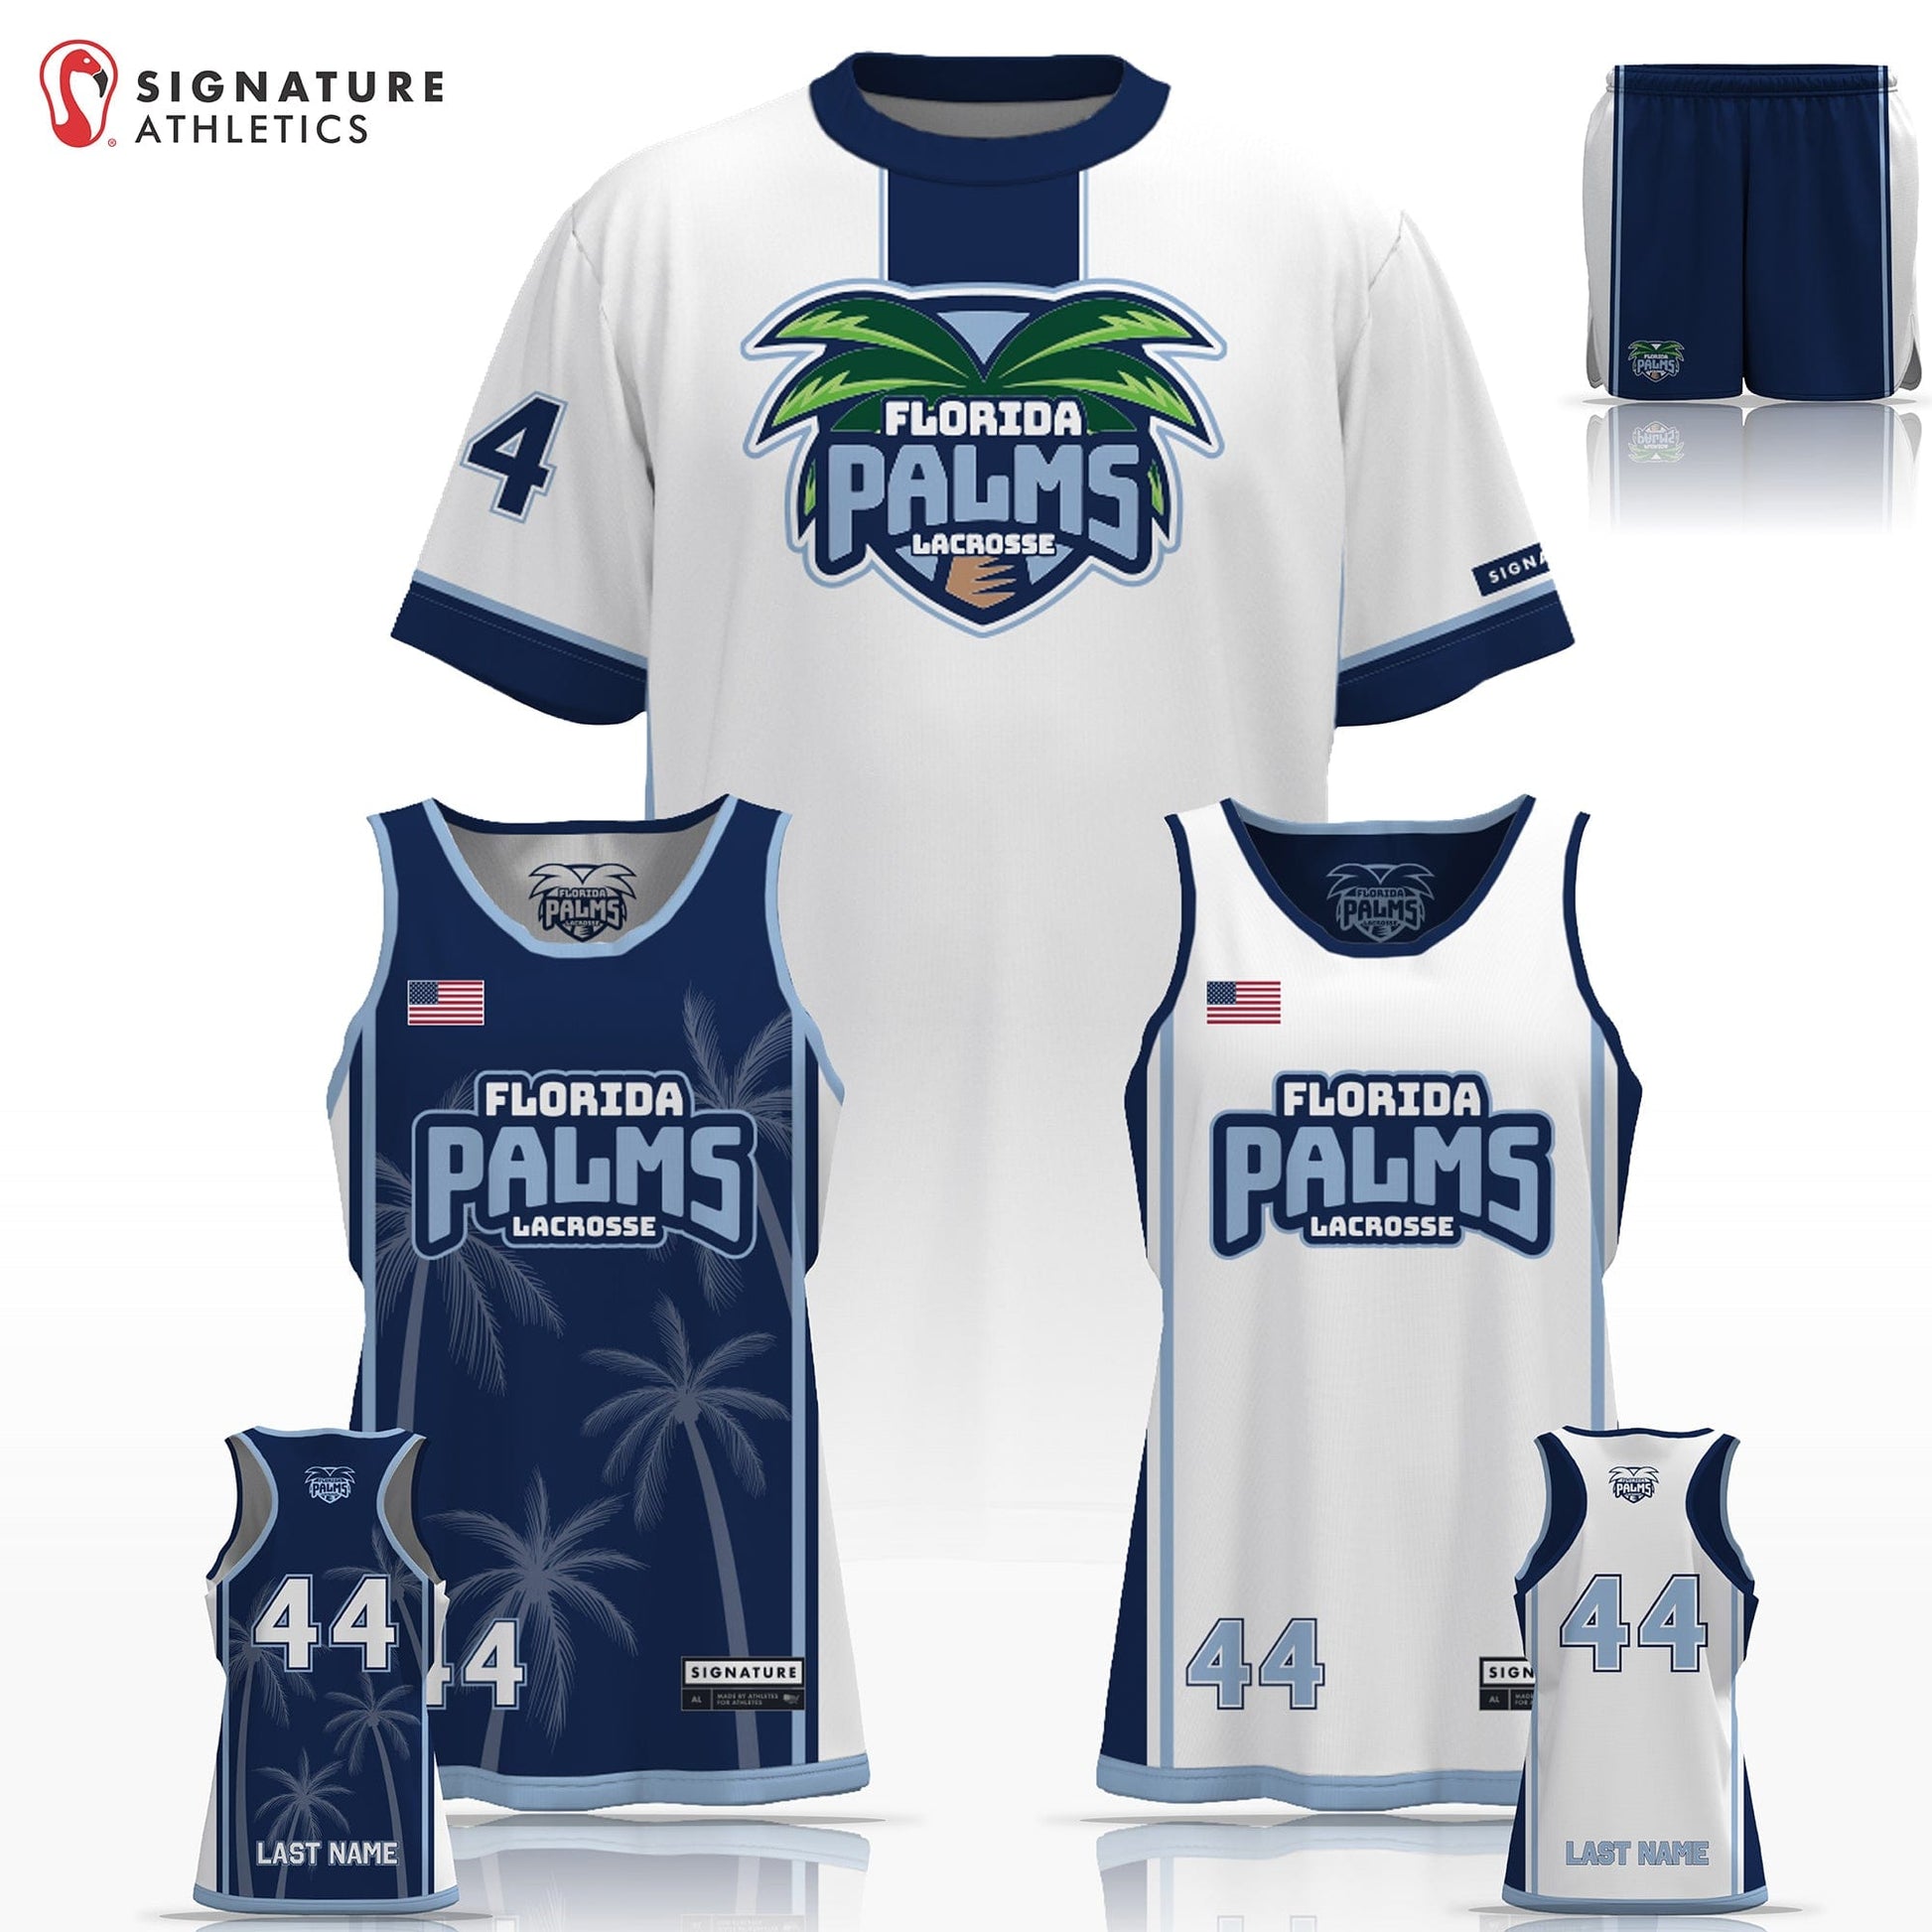 Florida Palms Lacrosse Women's 3 Piece Player Game Package Signature Lacrosse